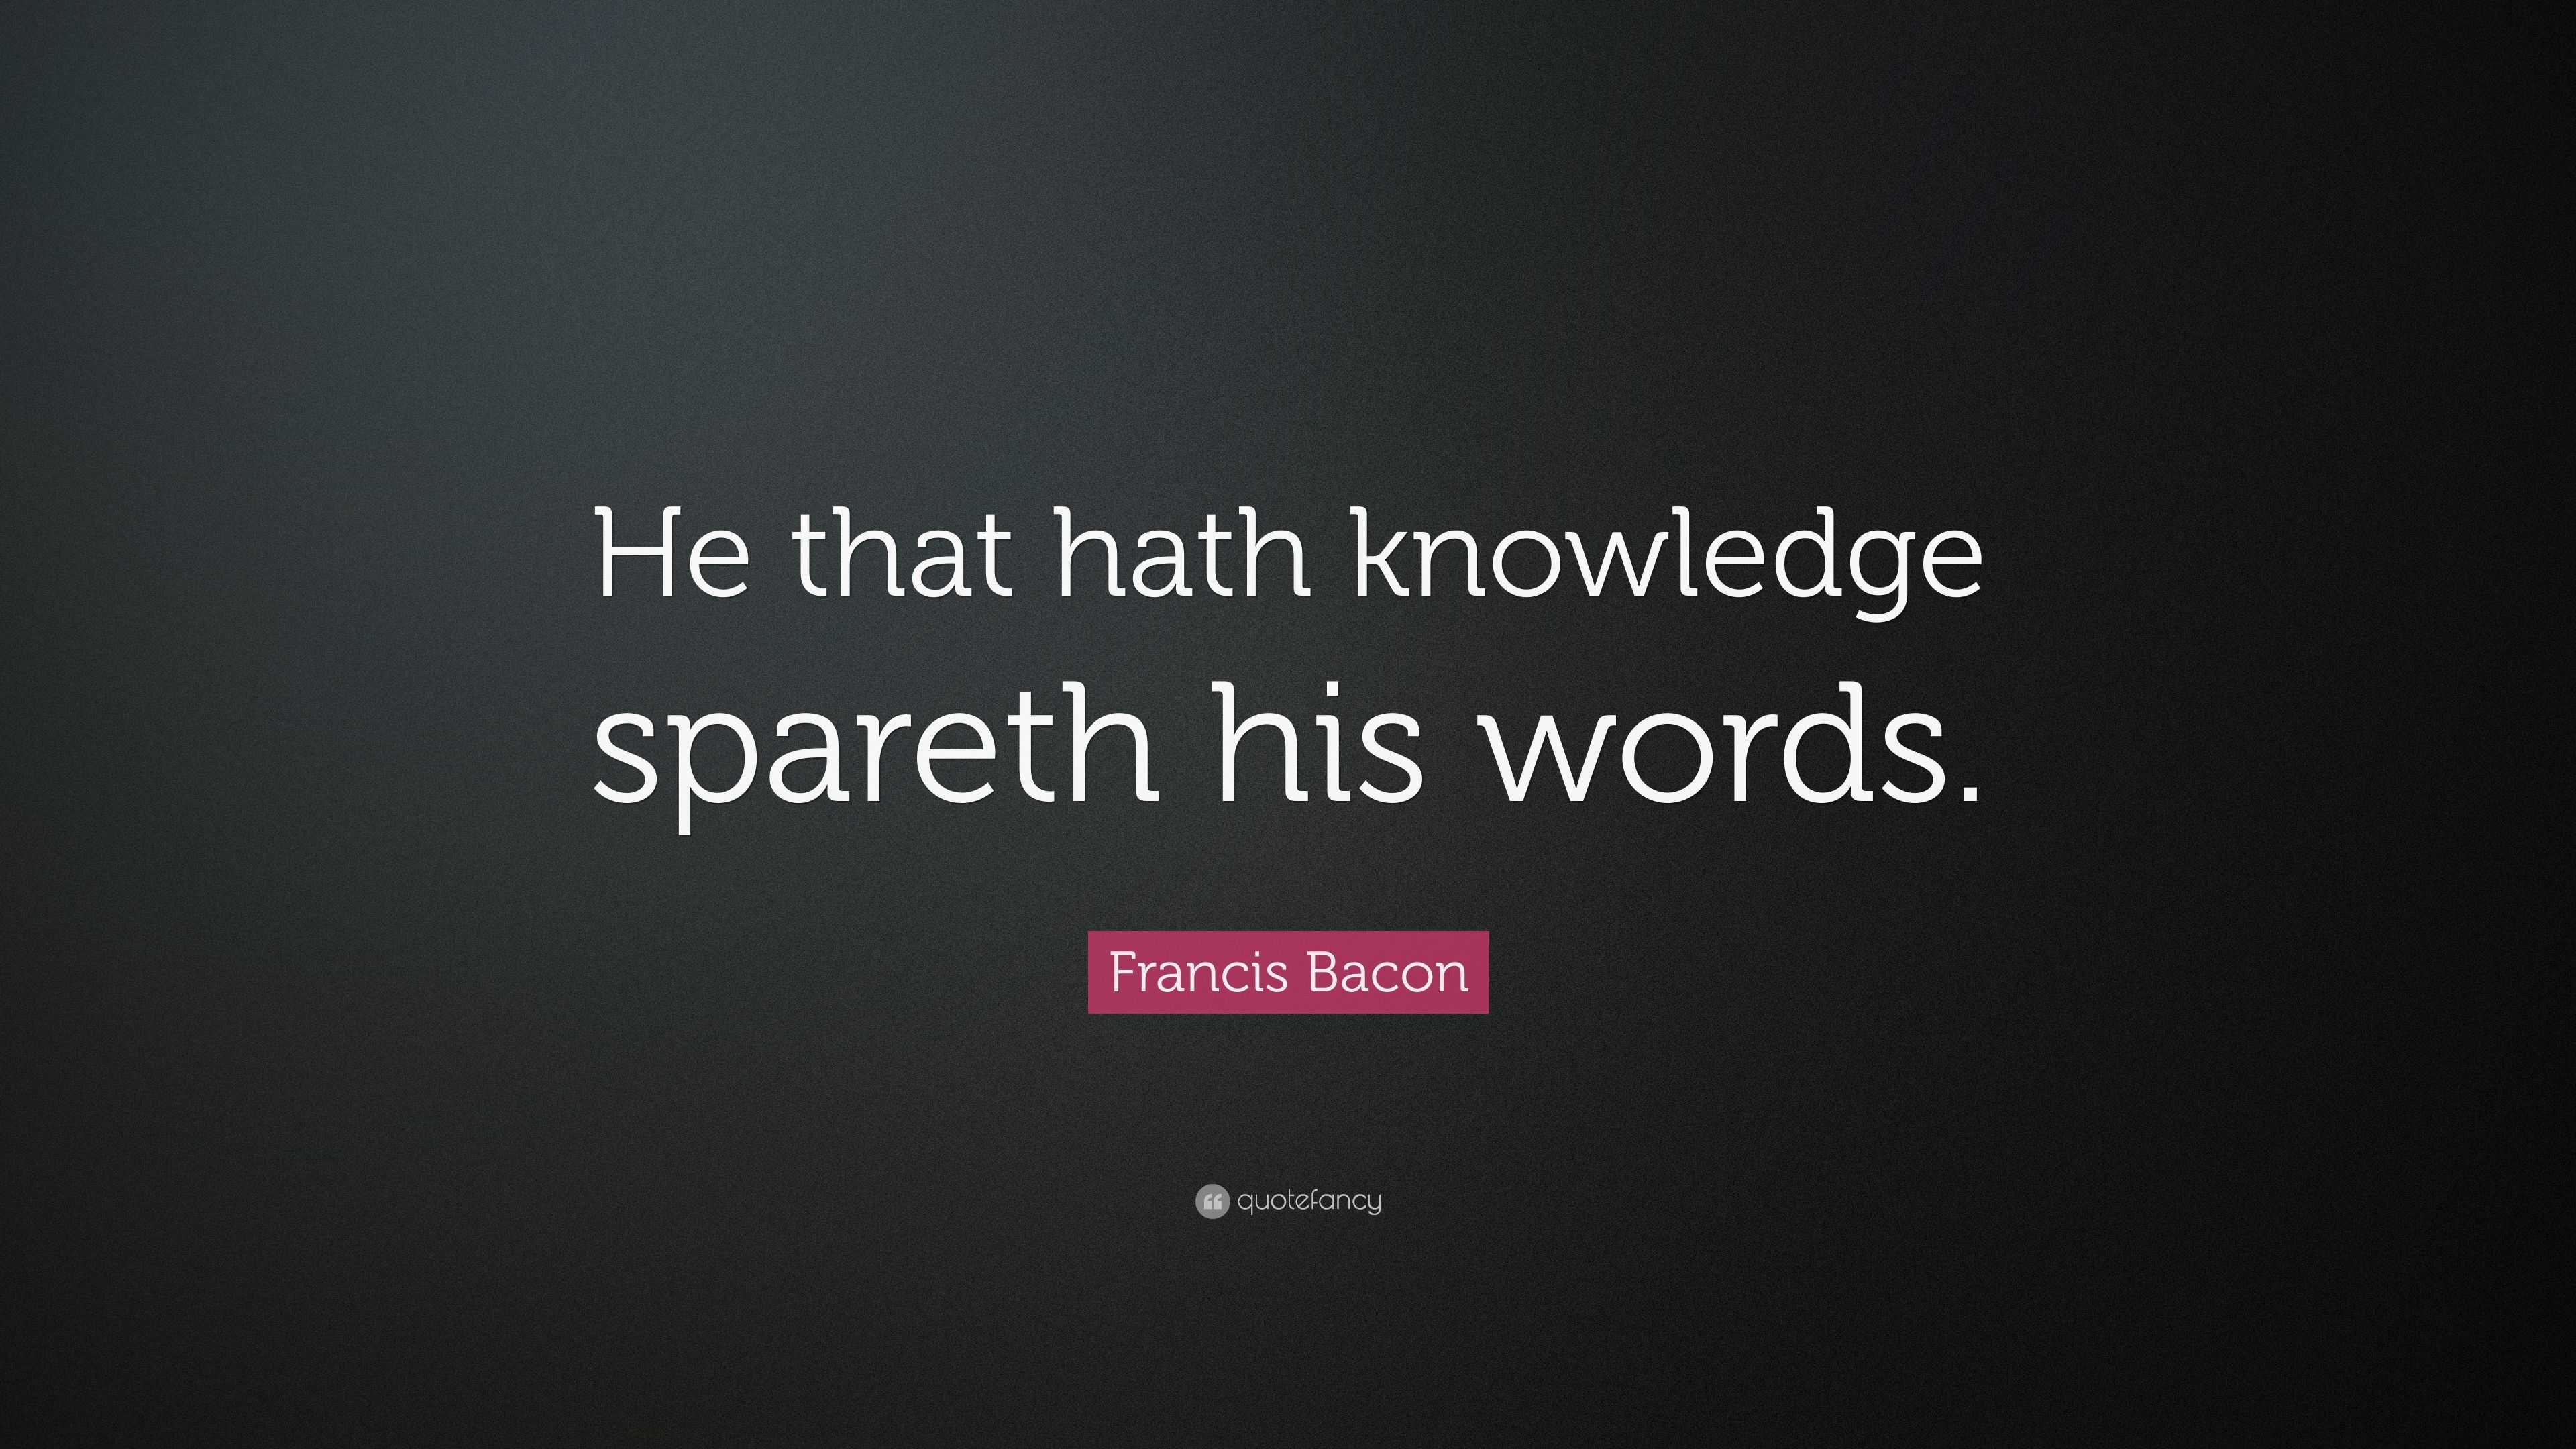 Francis Bacon Quote: “He that hath knowledge spareth his words.”